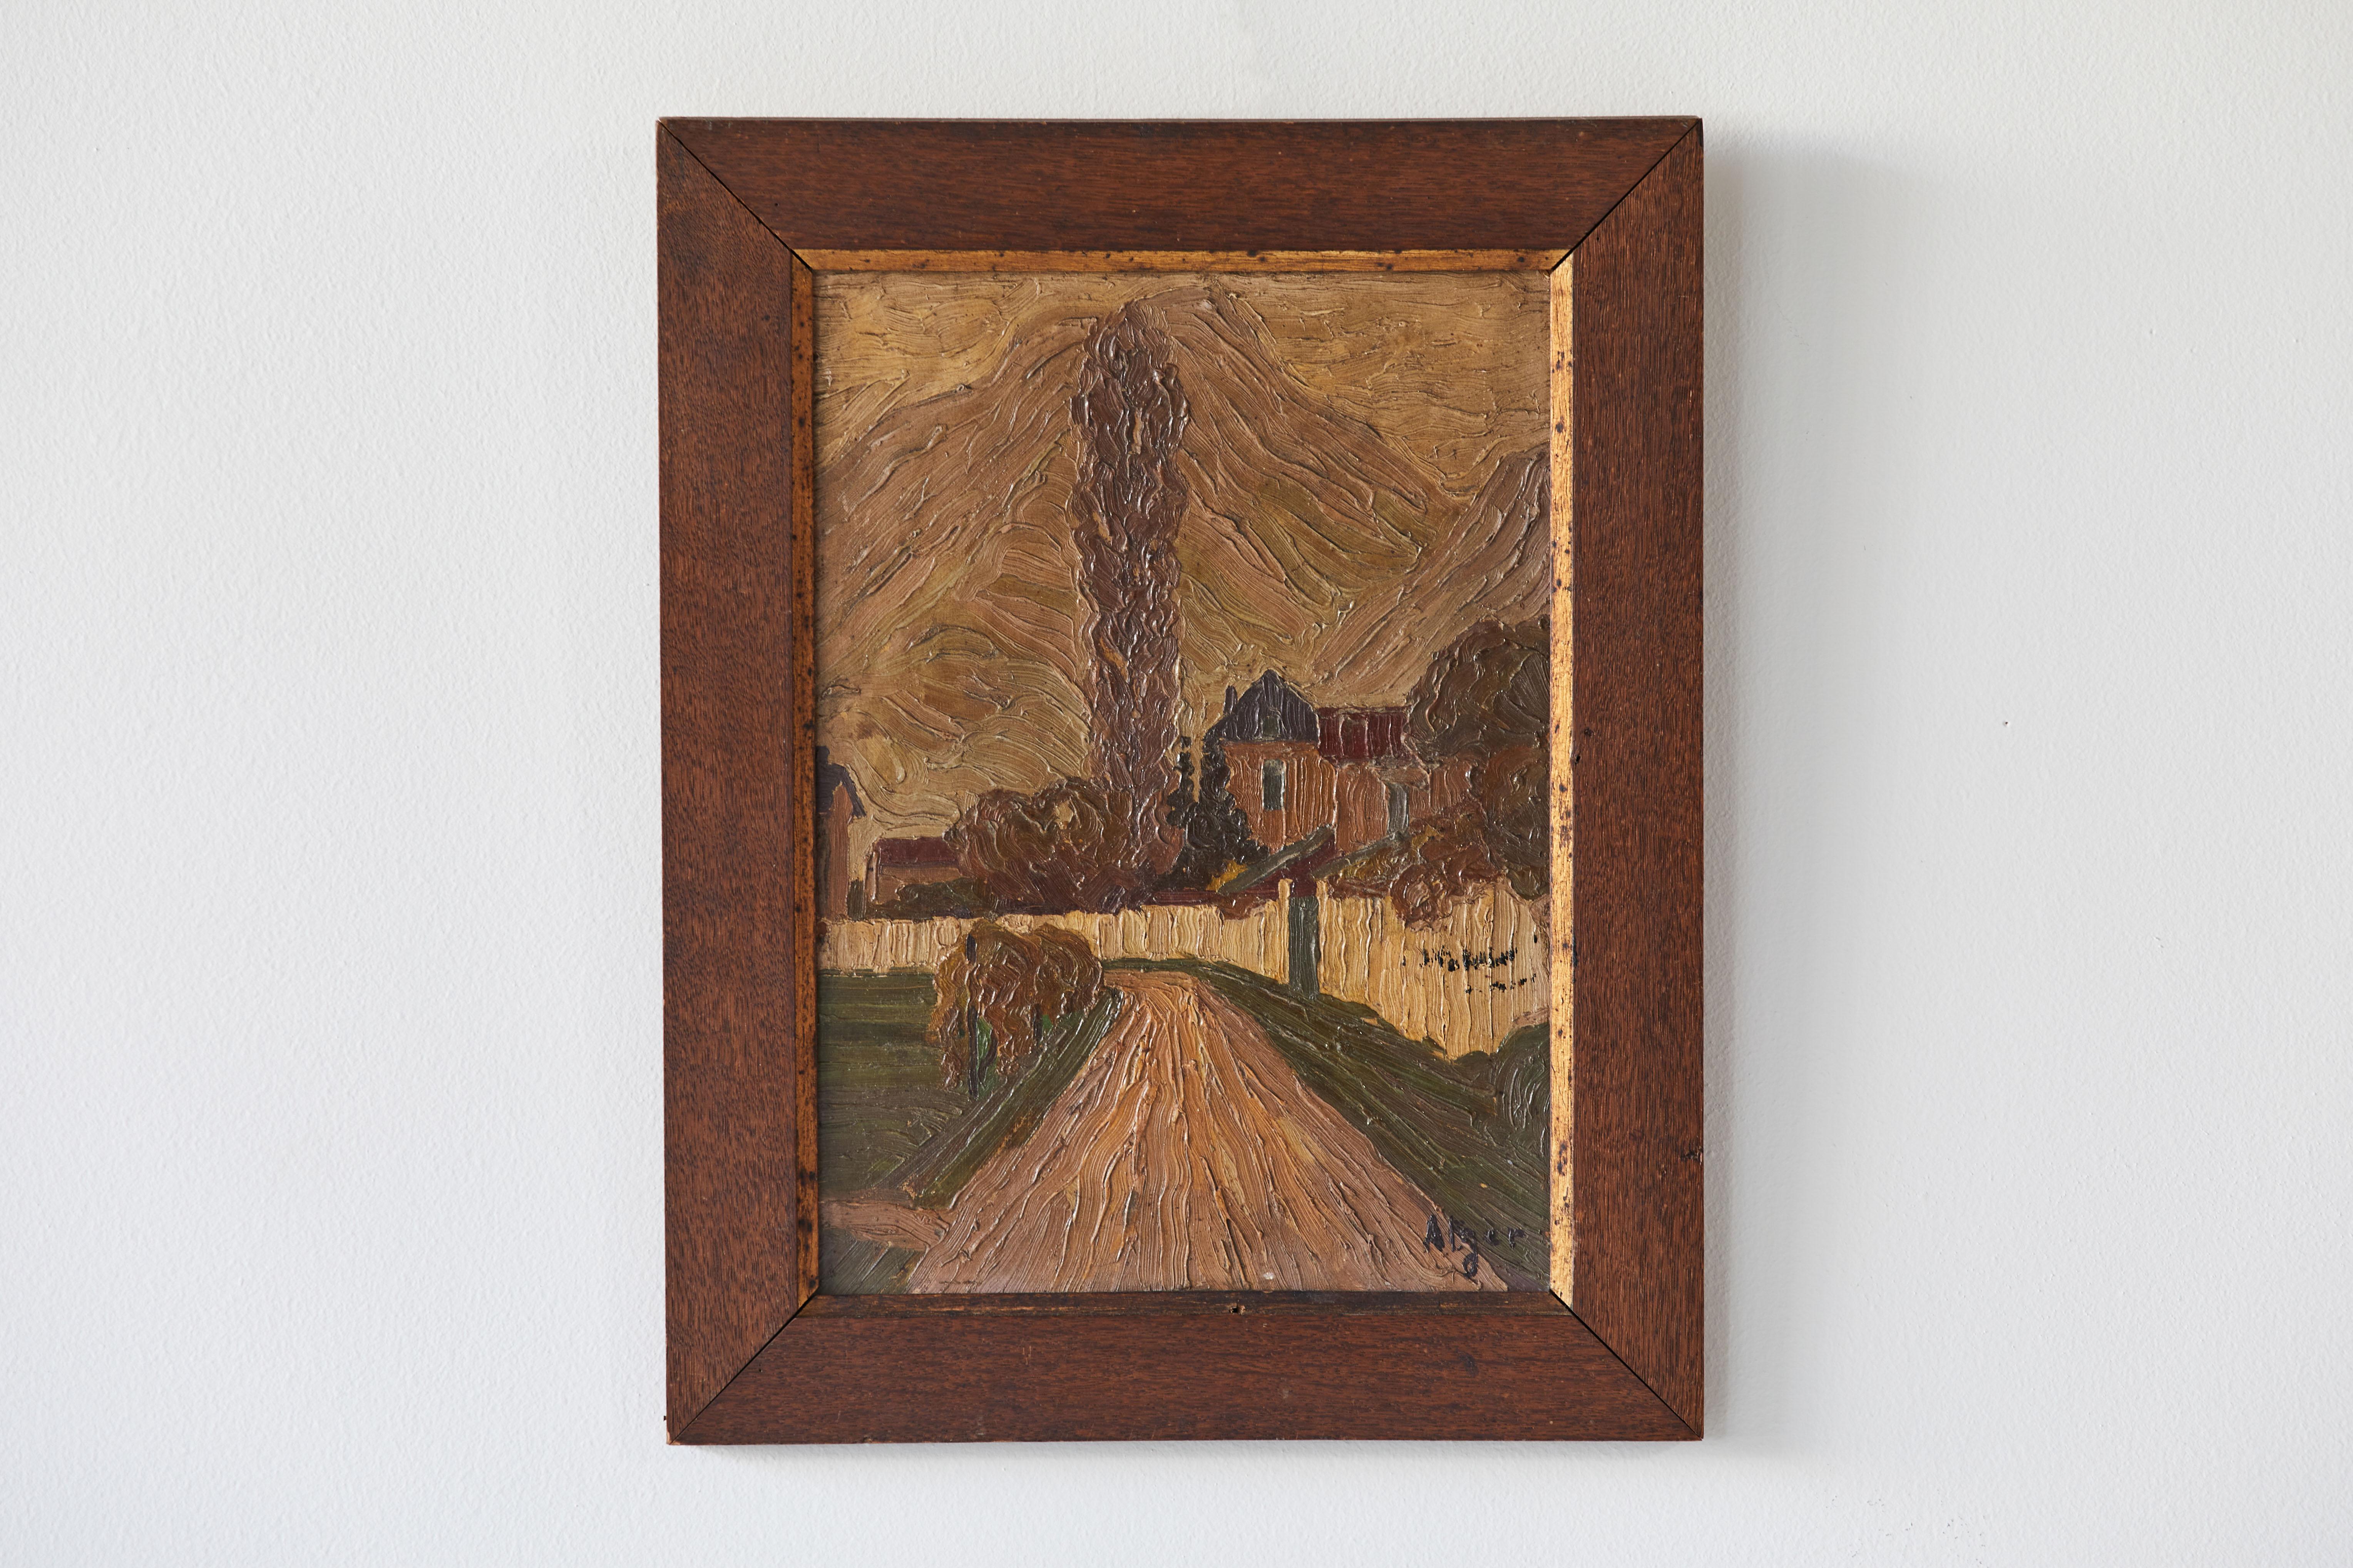 Oak Framed Dutch oil painting in original frame. The painting is beautiful with heavy brush strokes.